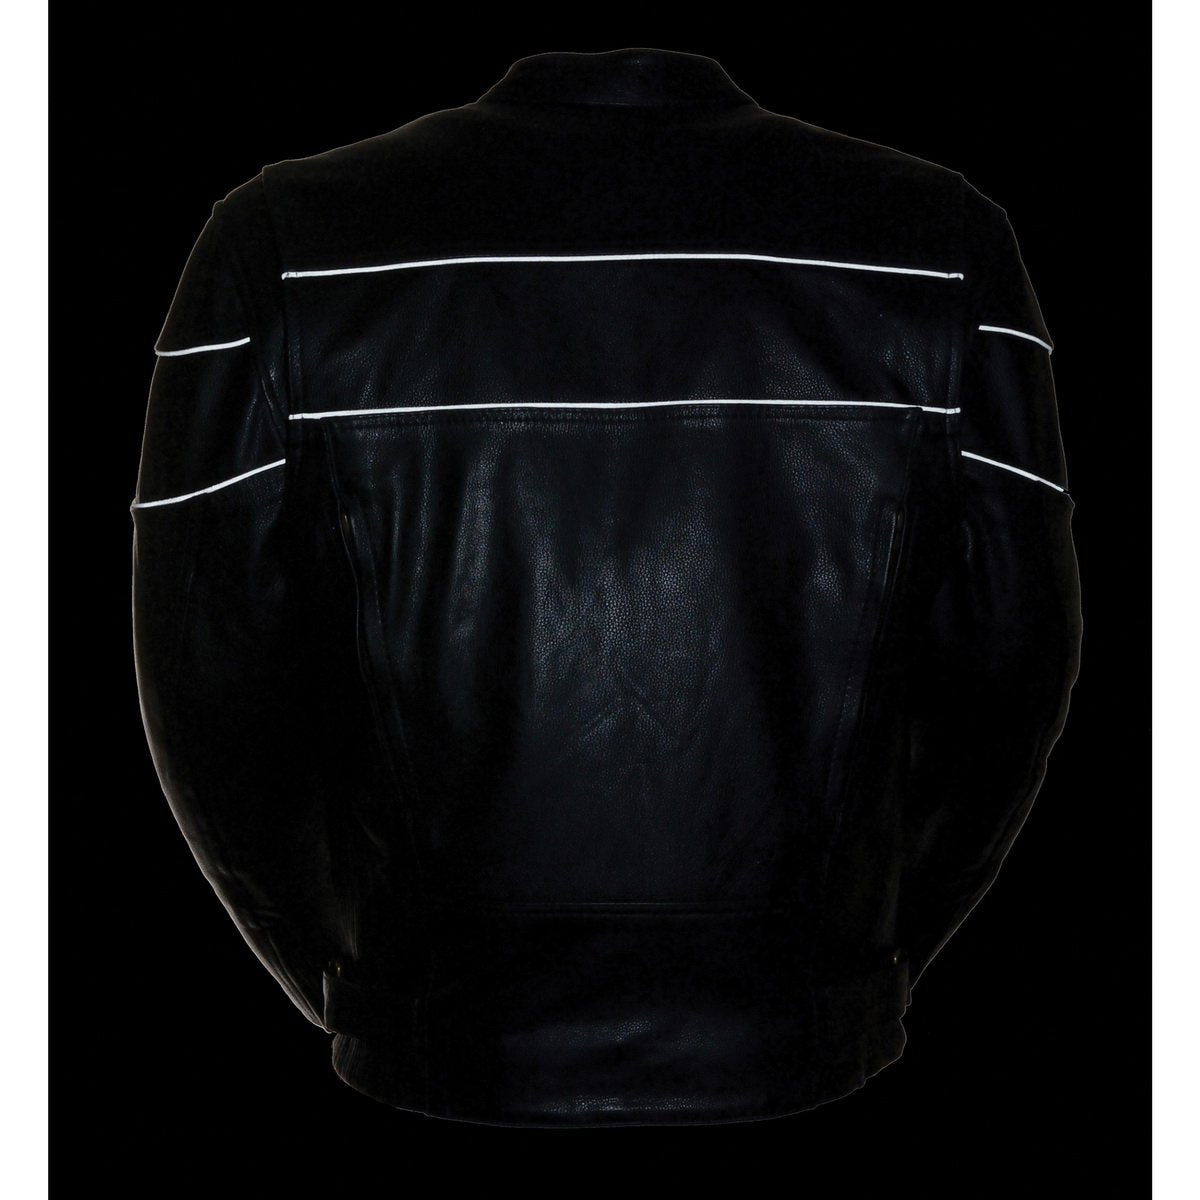 Milwaukee Leather LKM1785 Men's Black Leather Side Stretch Jacket with Reflective Piping - Milwaukee Leather Mens Leather Jackets